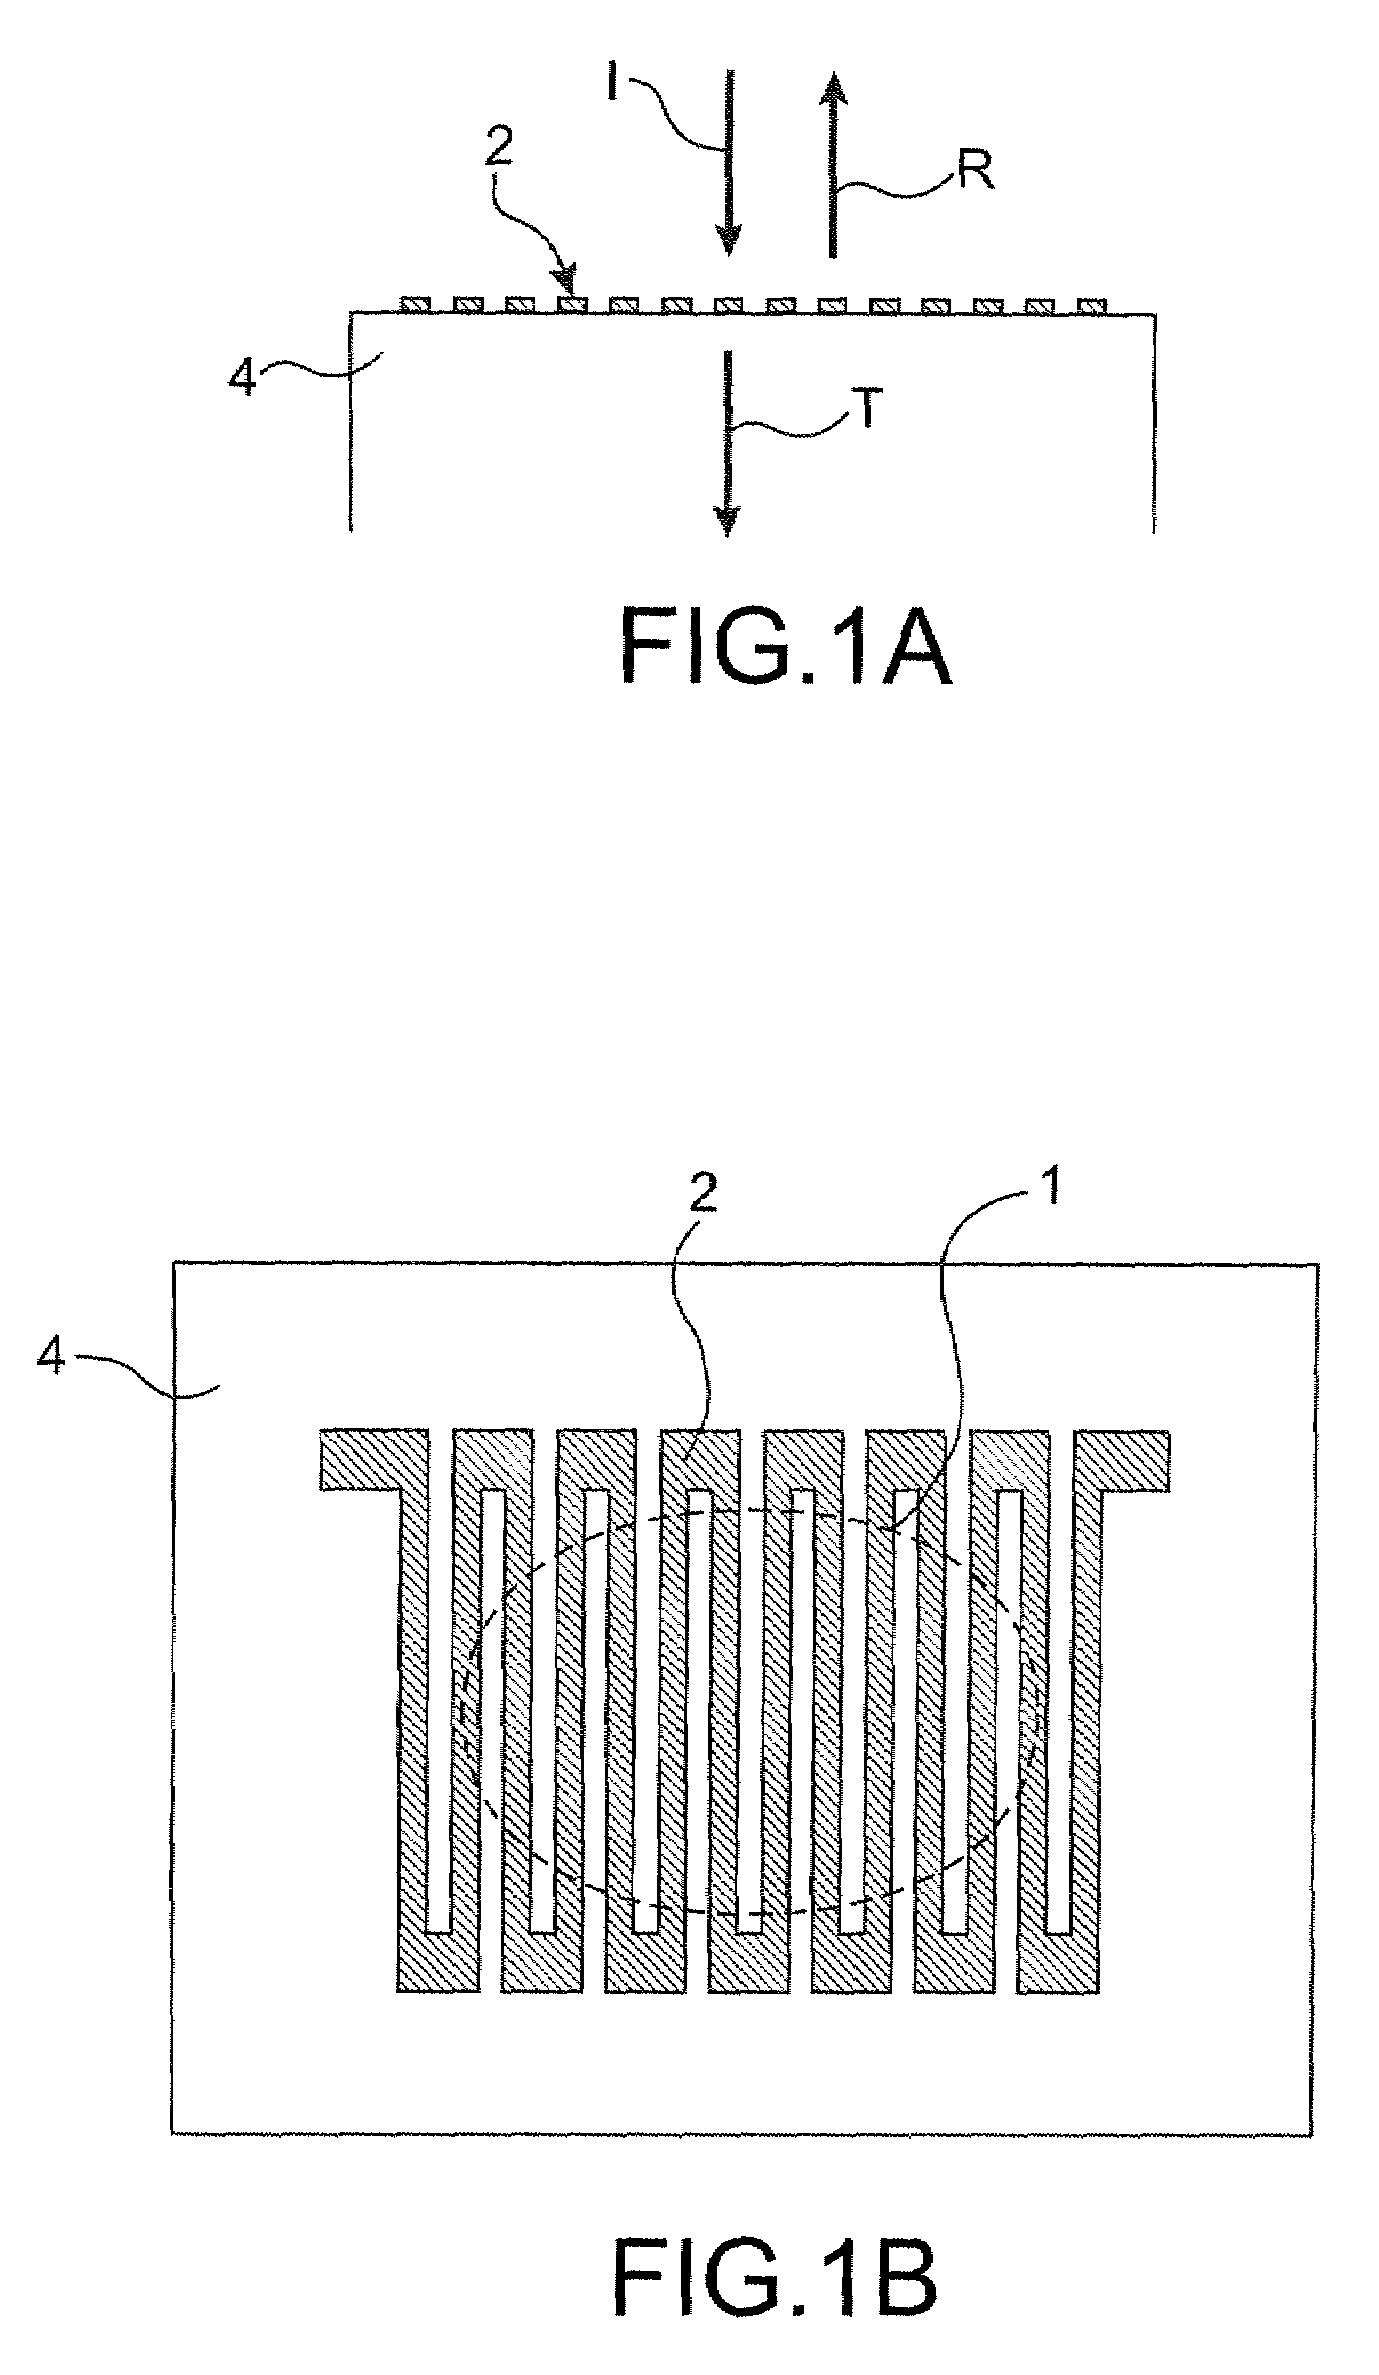 High time-resolution ultrasensitive optical detector, using grating coupling